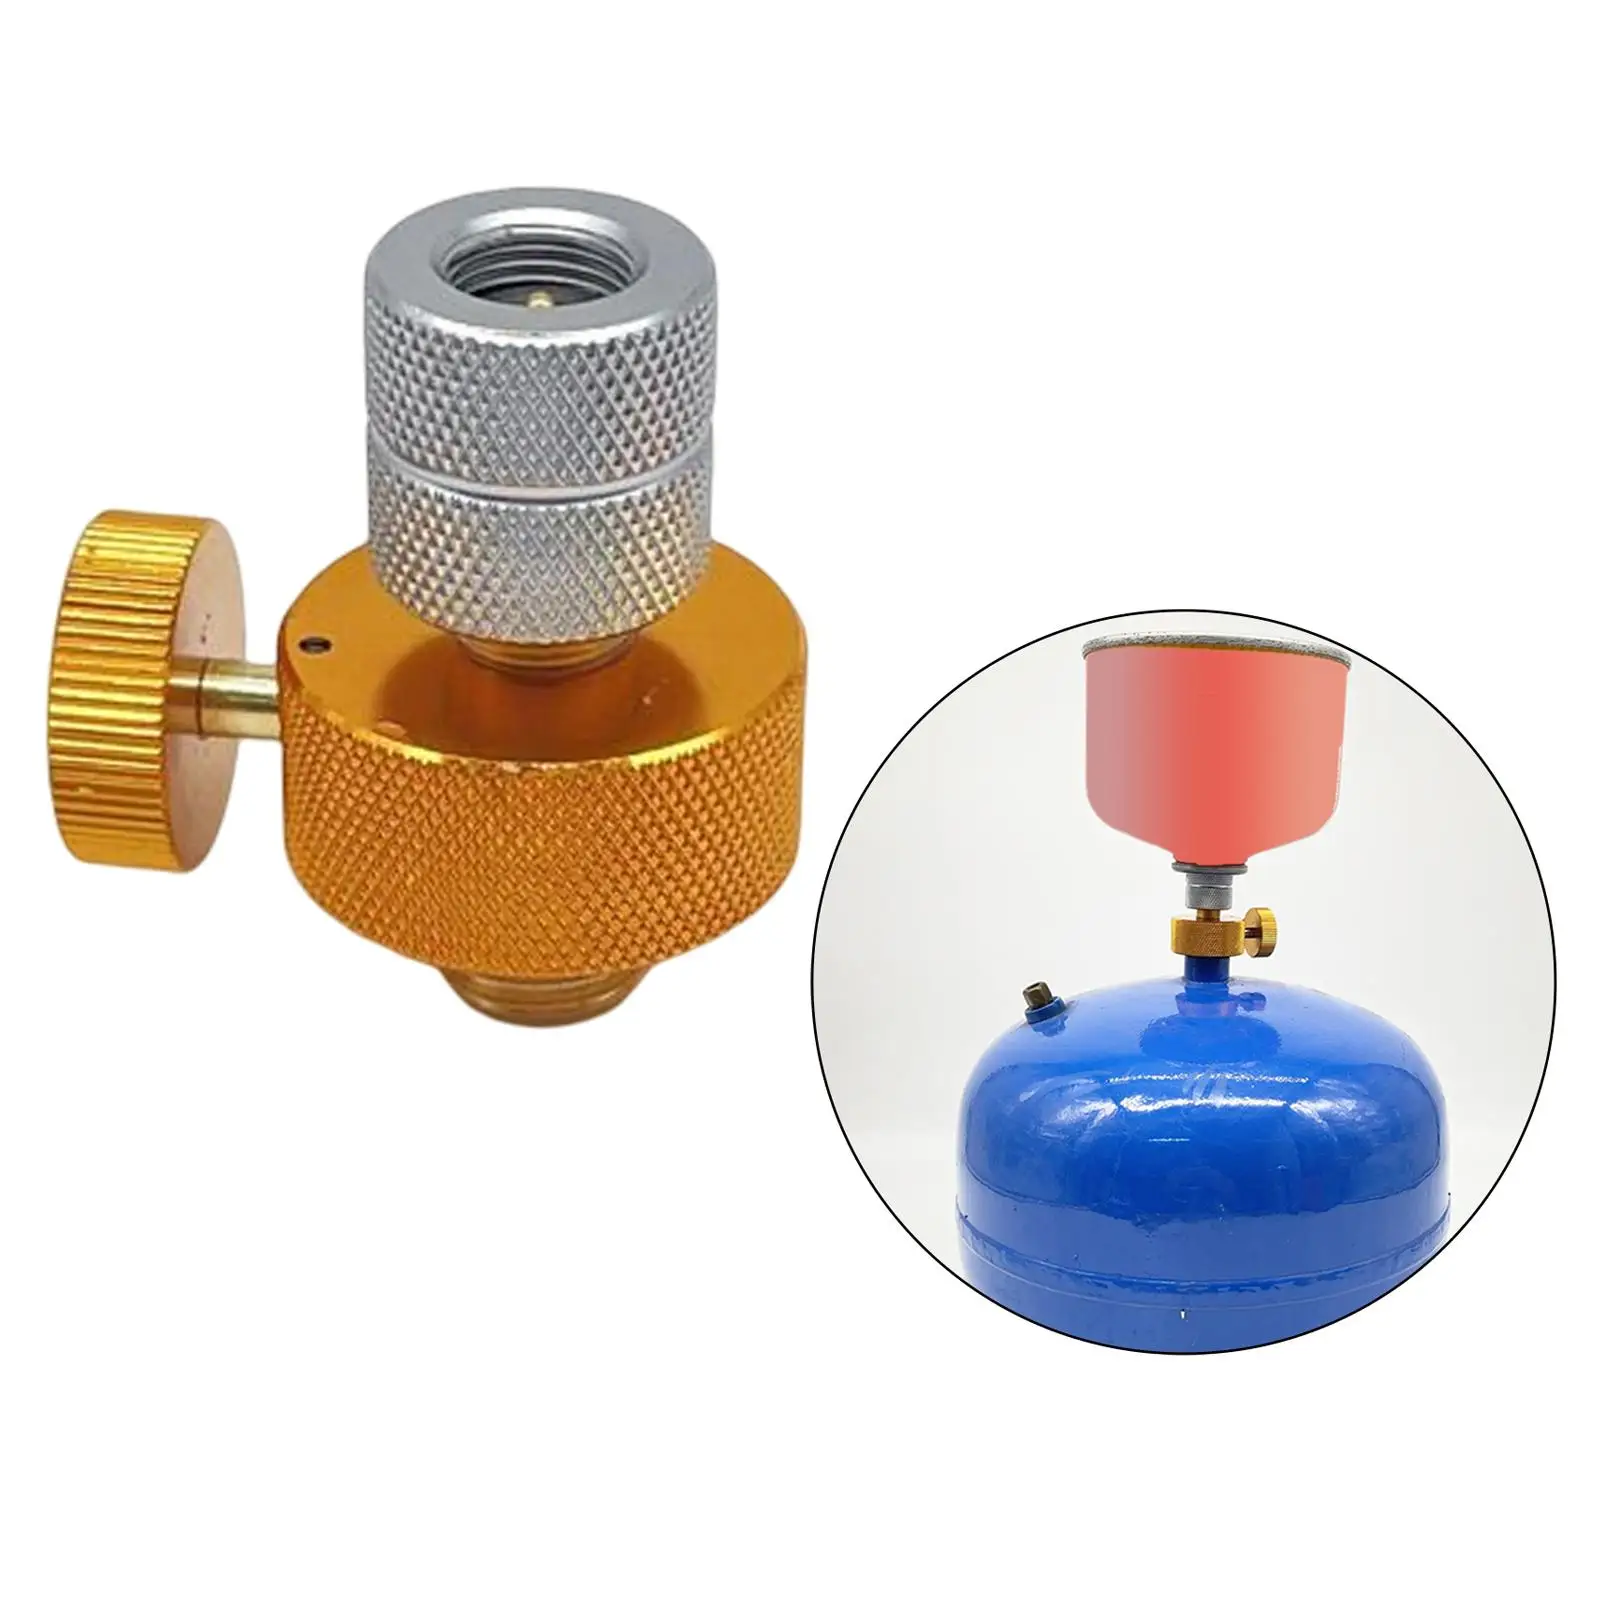 Portable Gas Tank Adapter, Furnace Connector, Gas Filling Convert, Cylinder for Camping Fuel Tank Gas Canister Cooking